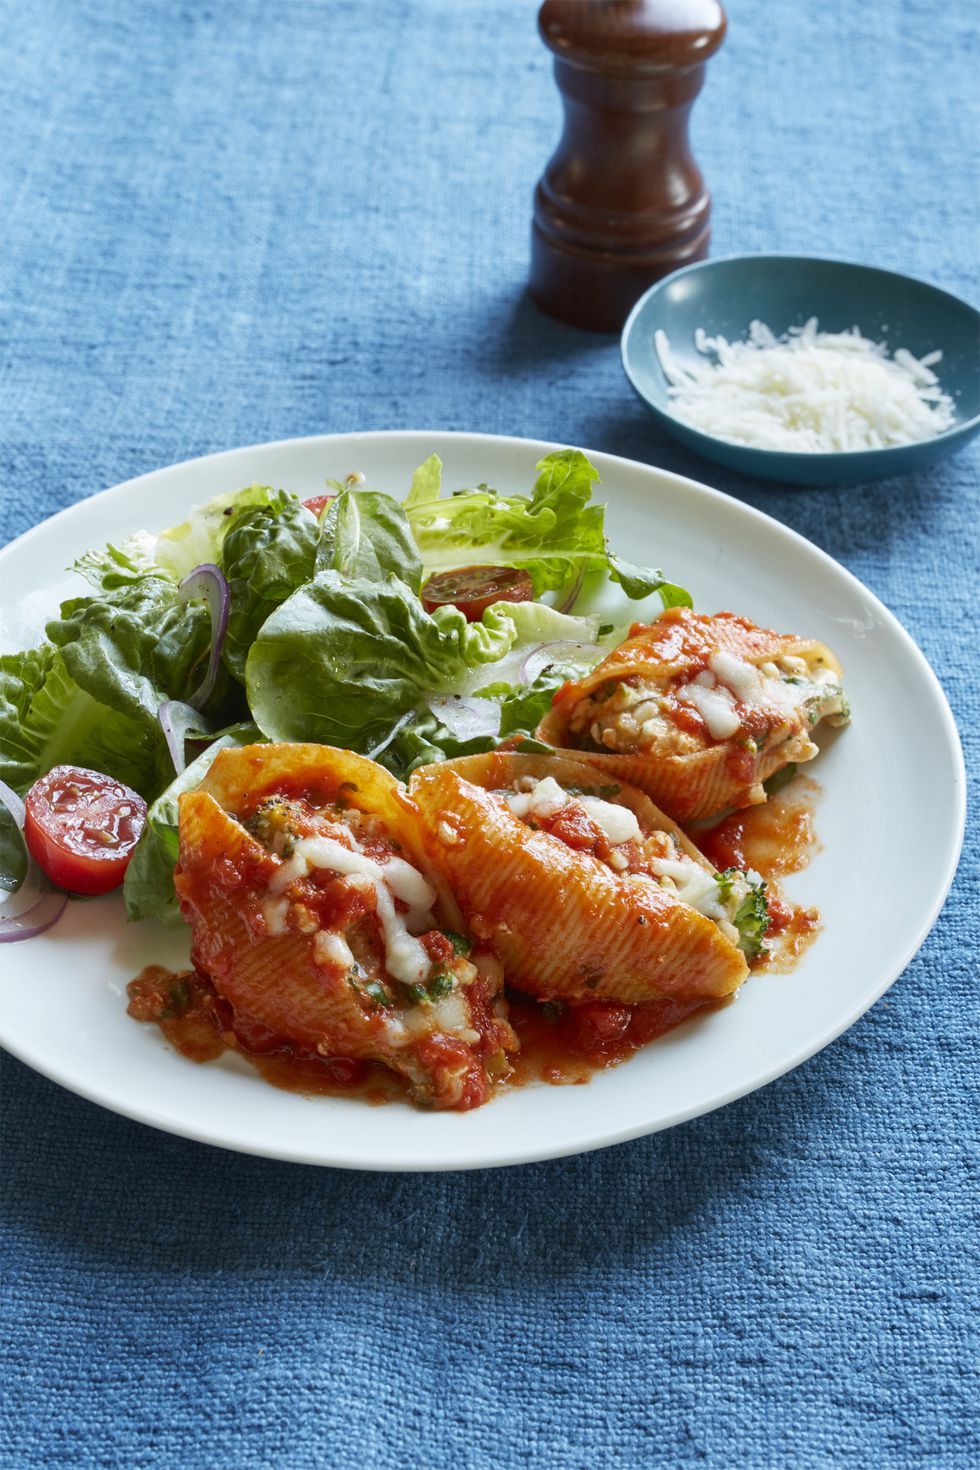 meatless dinner ideas - Broccoli and Cheese Stuffed Shells